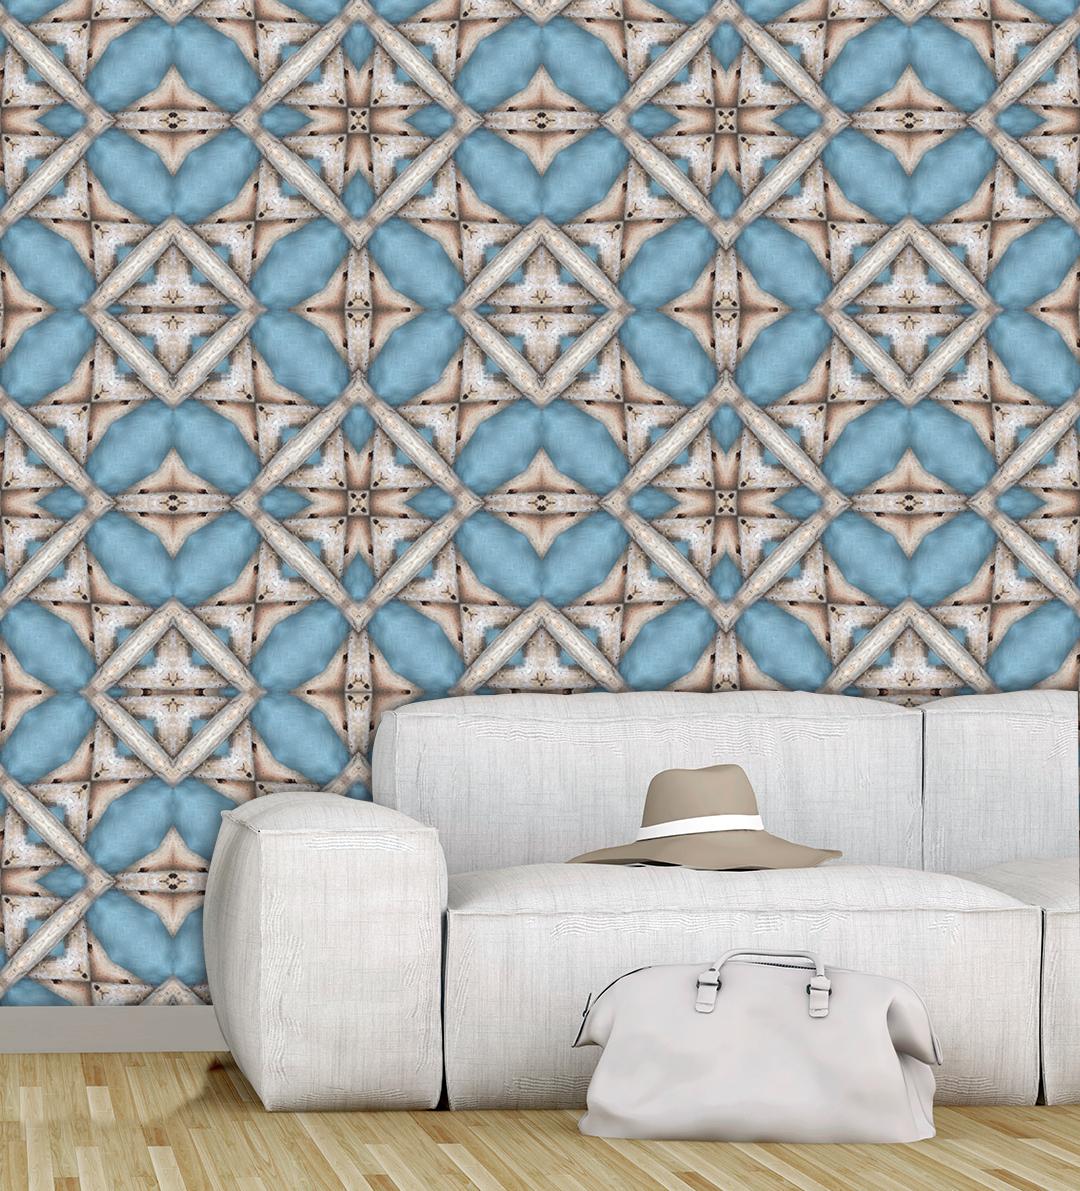 Our Grecian Series, inspired by Greece, reflects the iconic islands white architecture, hues of blues to reflect the Aegan and Mediterranean Seas,  and the natural woods found in the rustic elements of coastal areas. The combination and unique